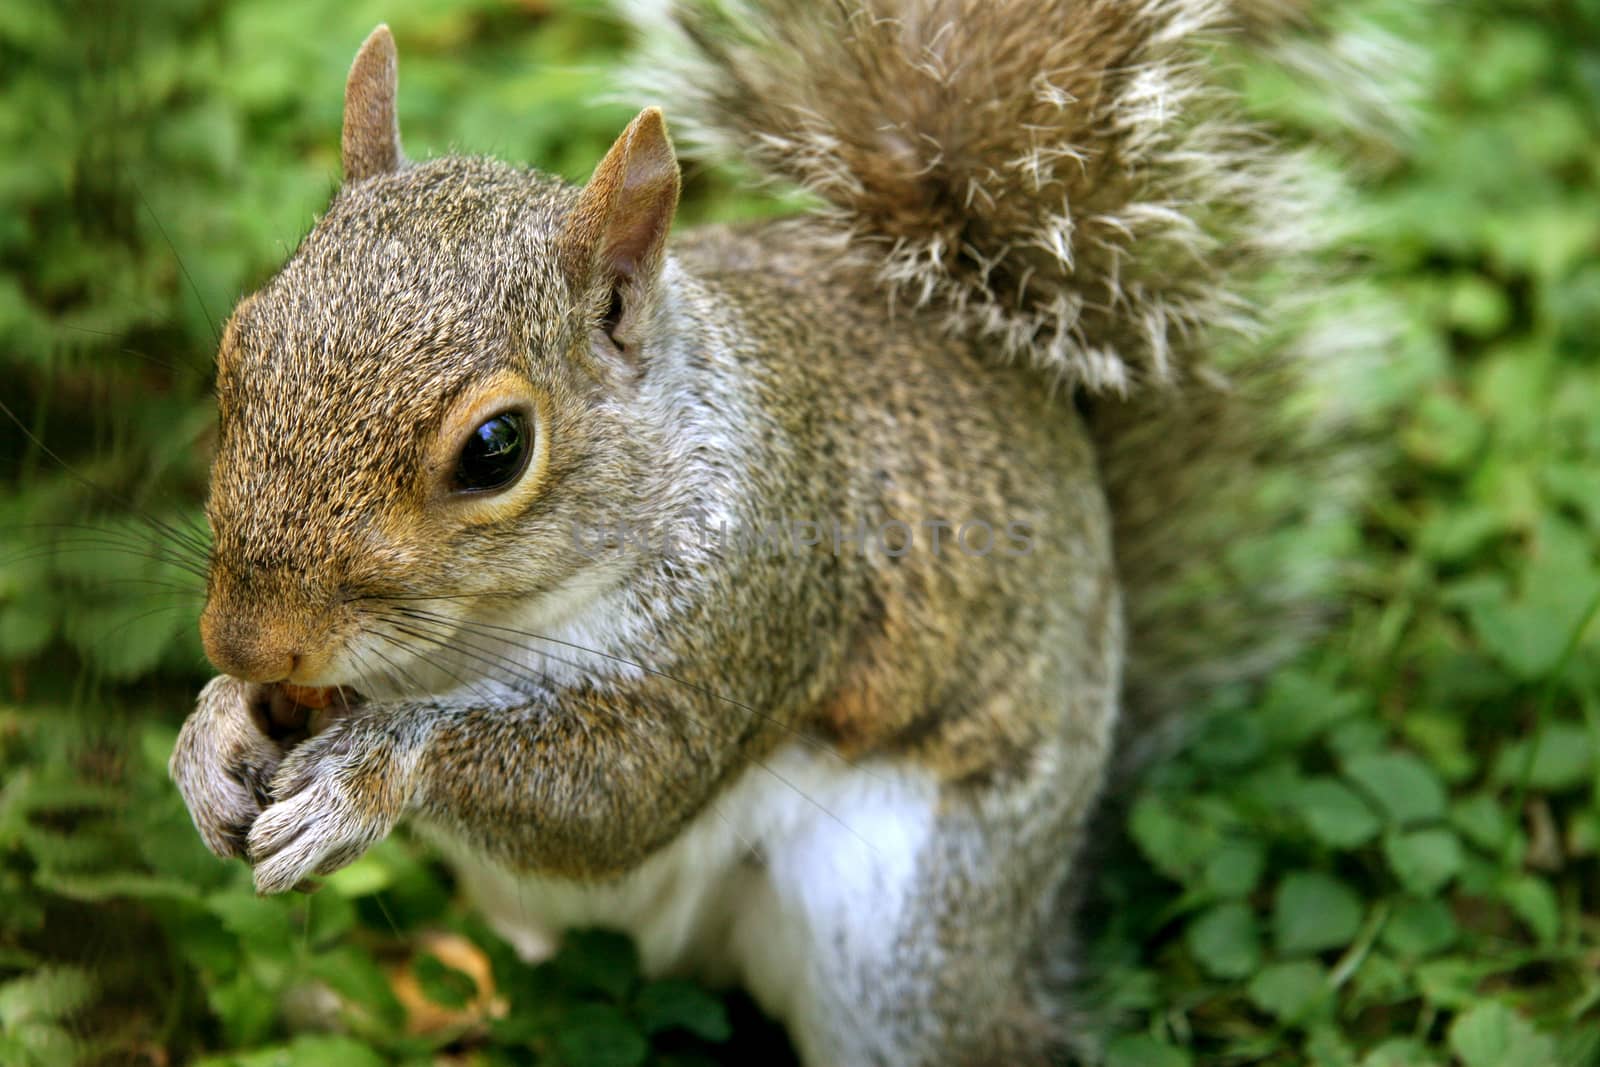 The American grey squirrel eating nut